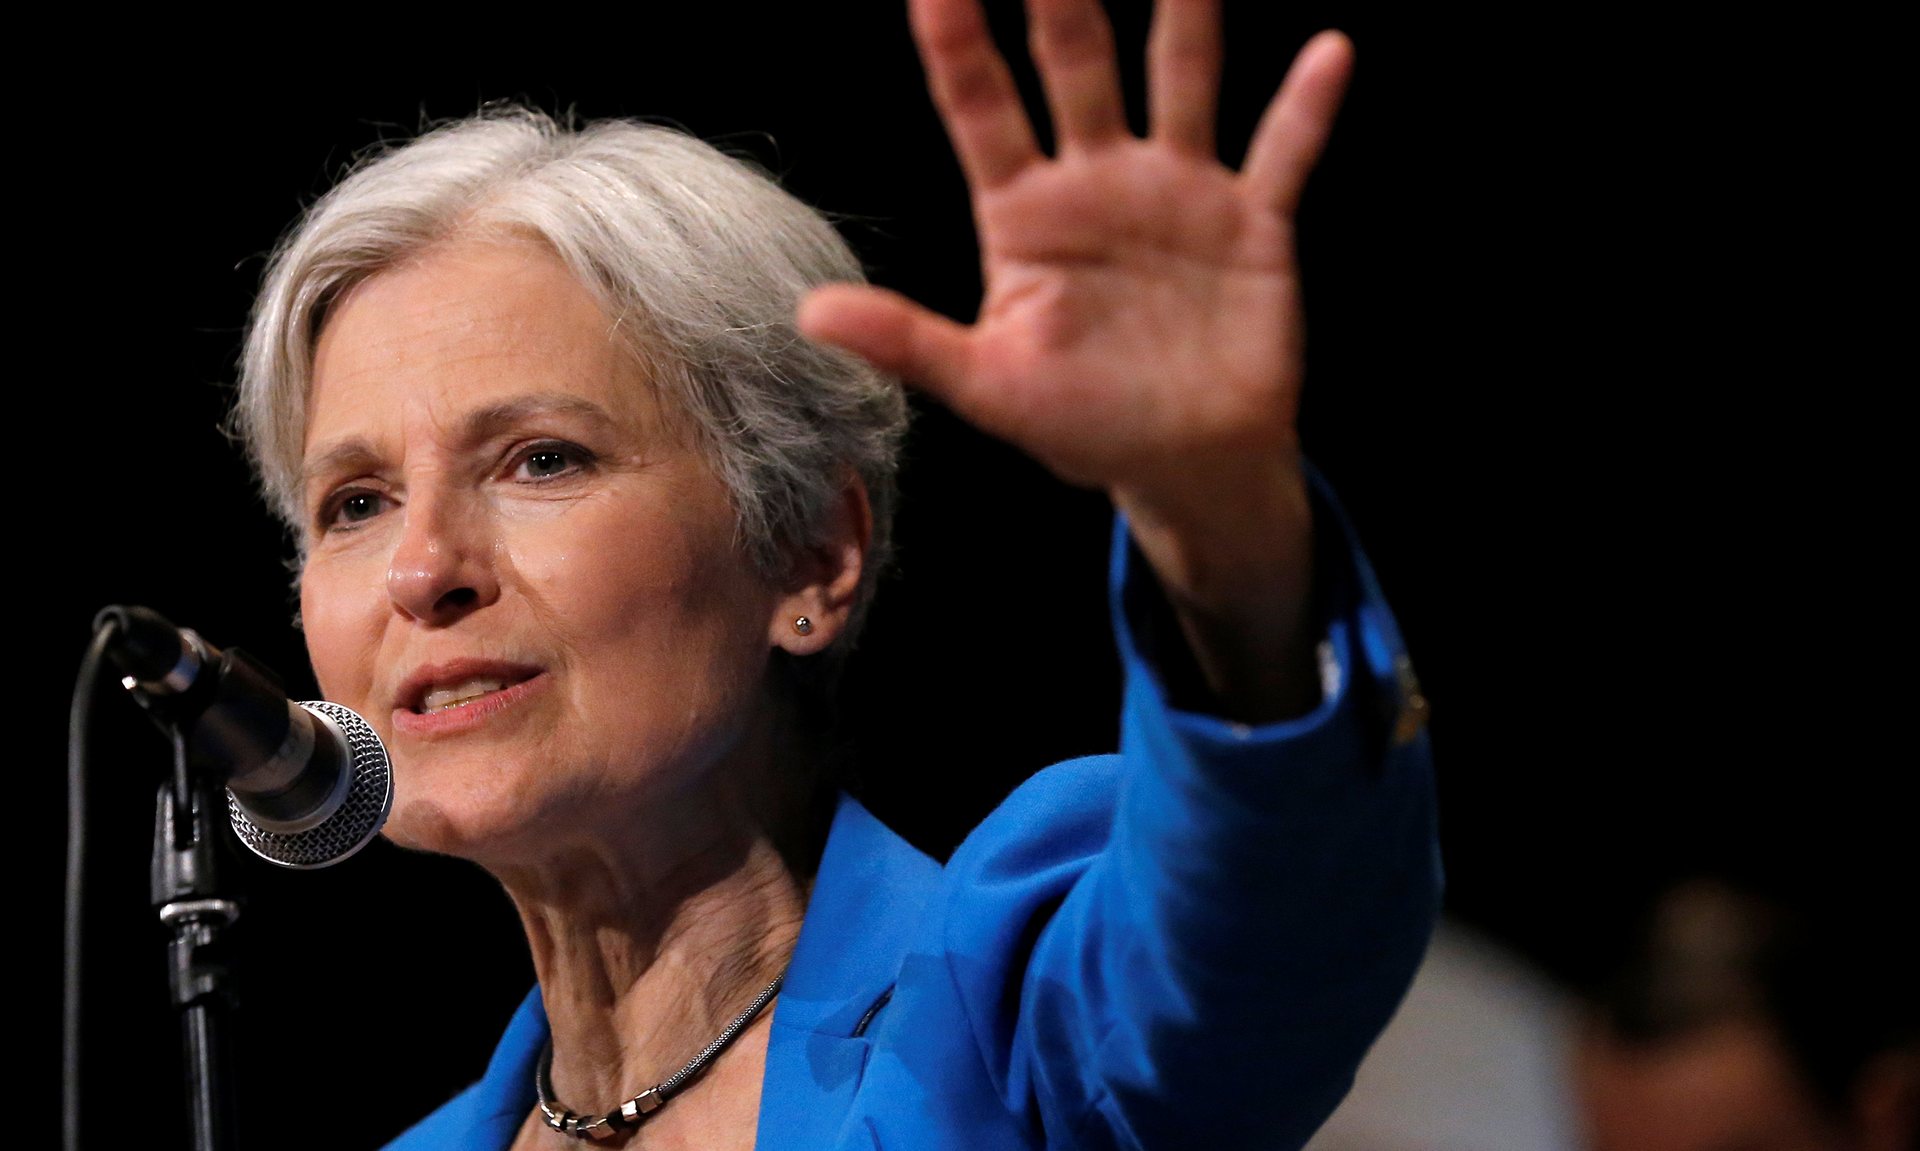 Jill Stein raises over $4.5m to request US election recounts in battleground states